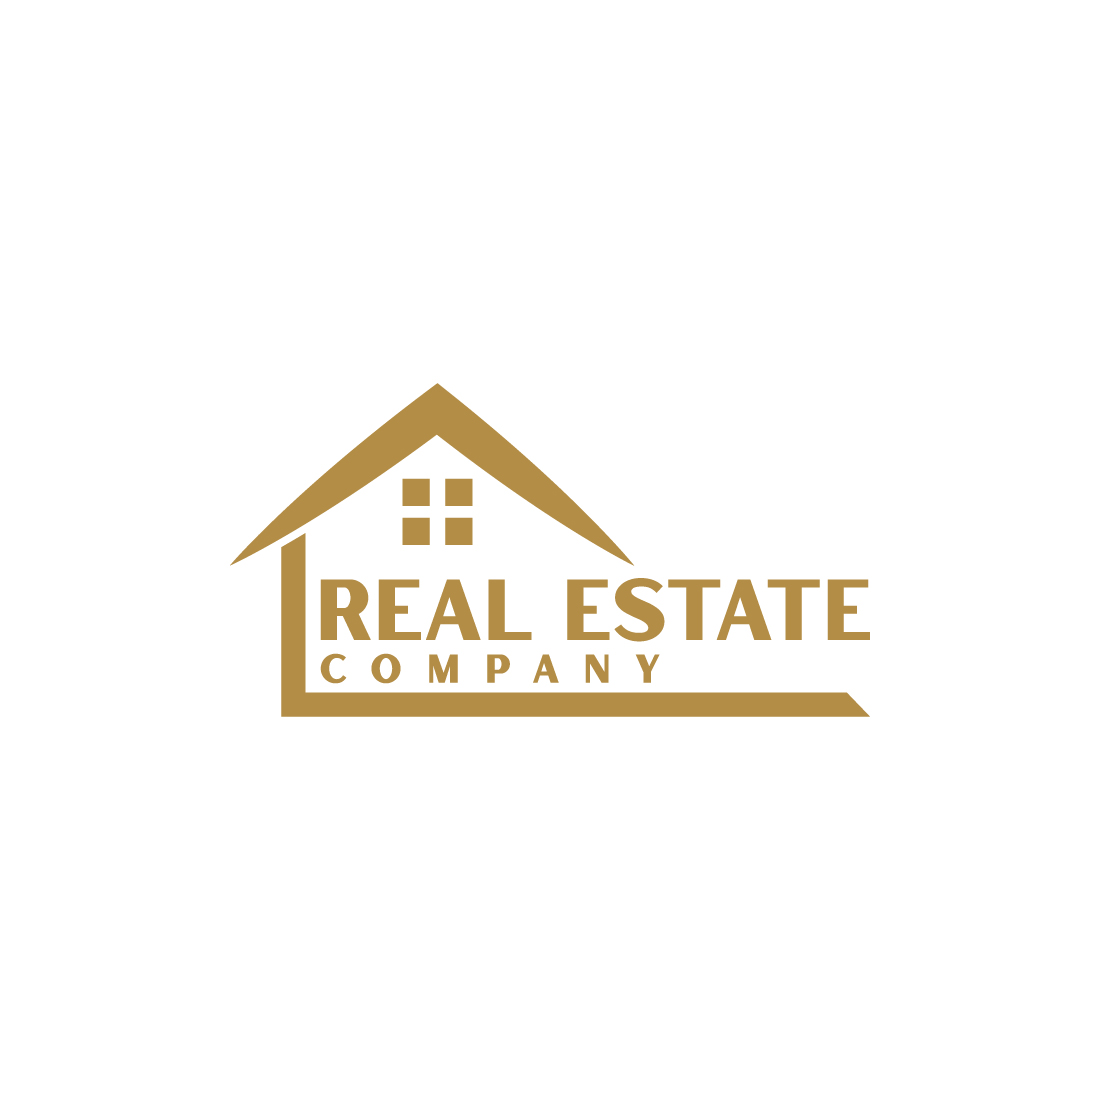 Real estate logo with Golden color preview image.